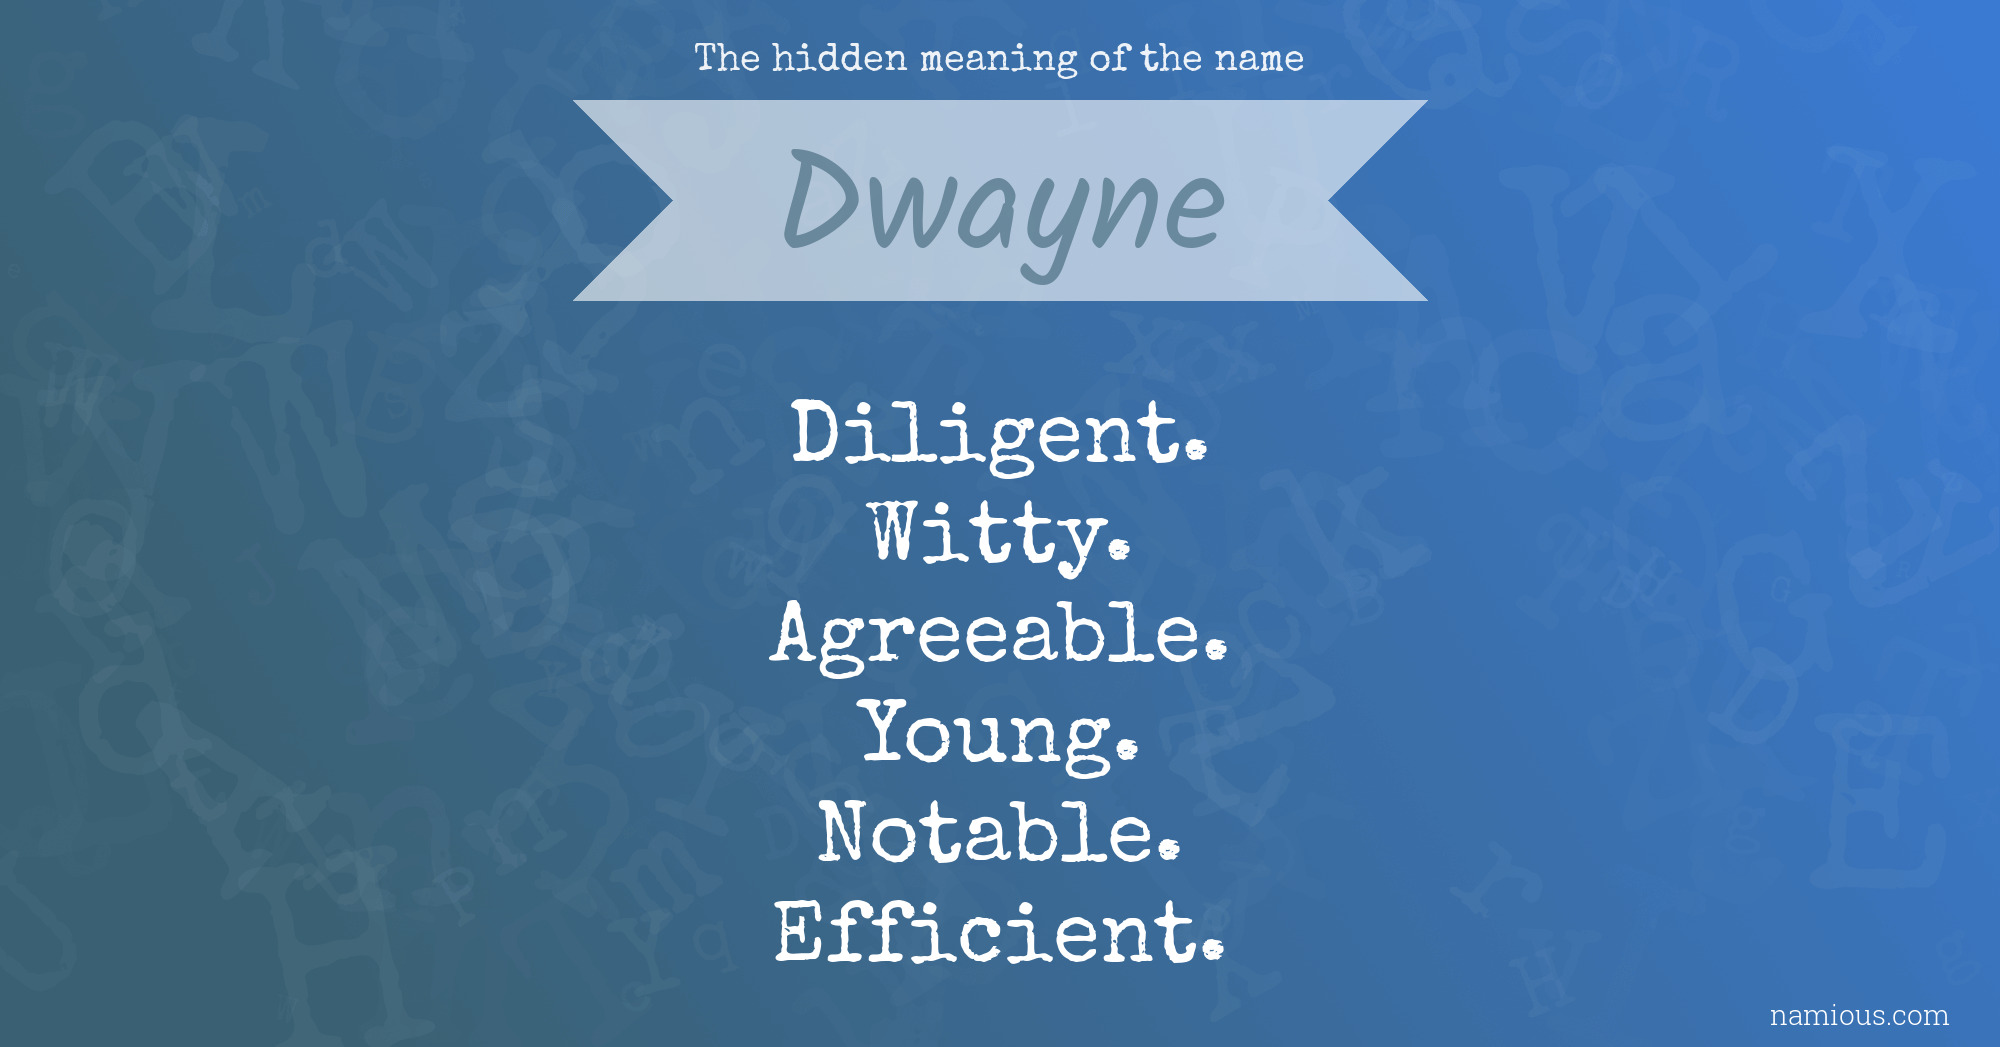 The hidden meaning of the name Dwayne